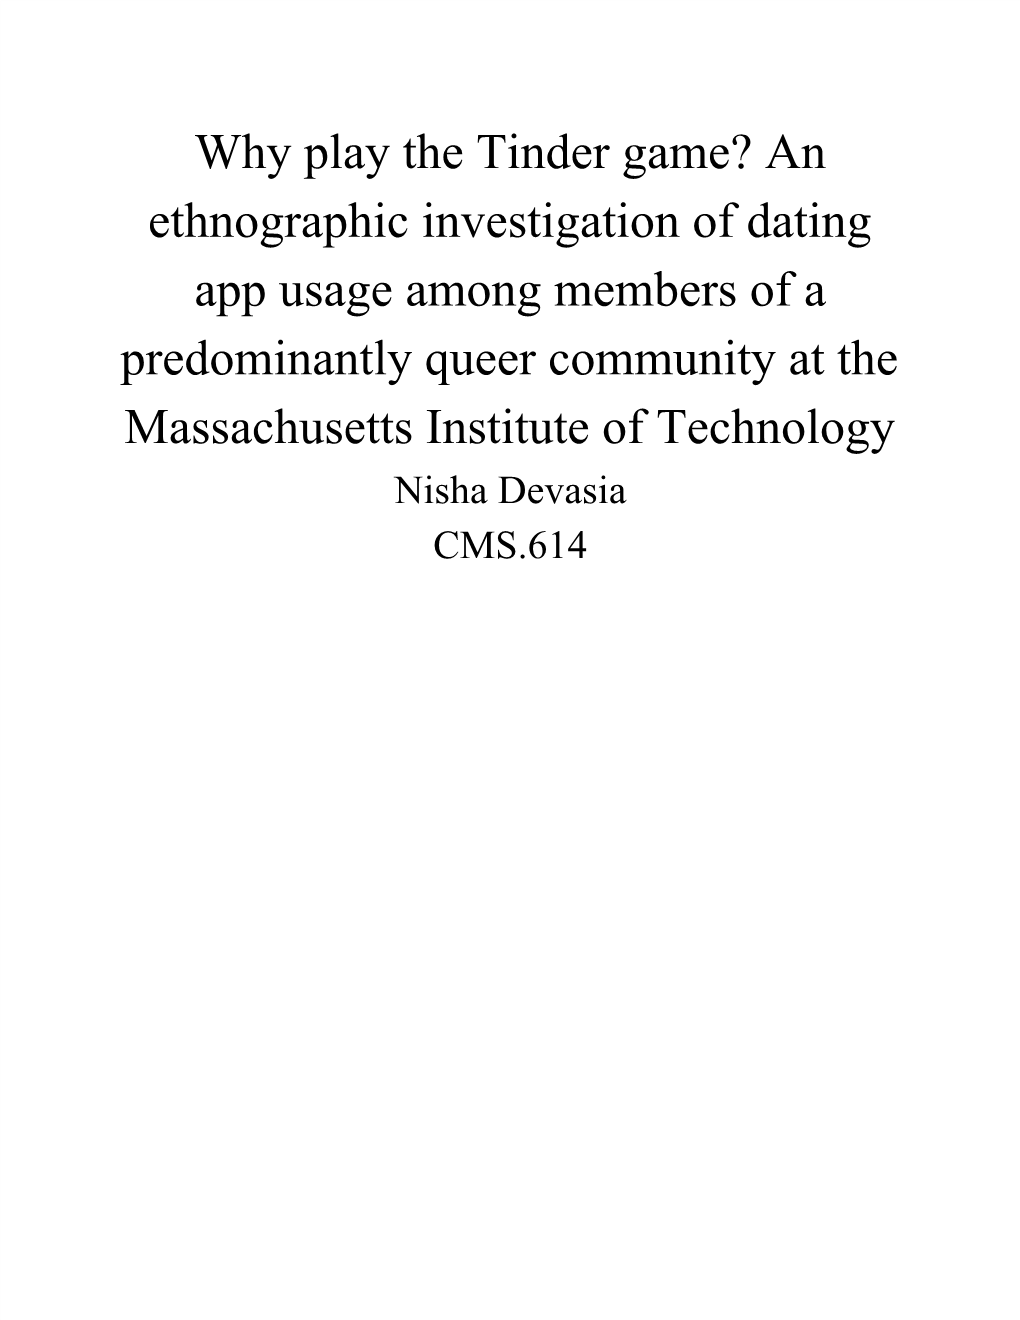 An Ethnographic Investigation of Dating App Usage Among Members of a Predominantly Queer Community at the Massachusetts Institute of Technology Nisha Devasia CMS.614